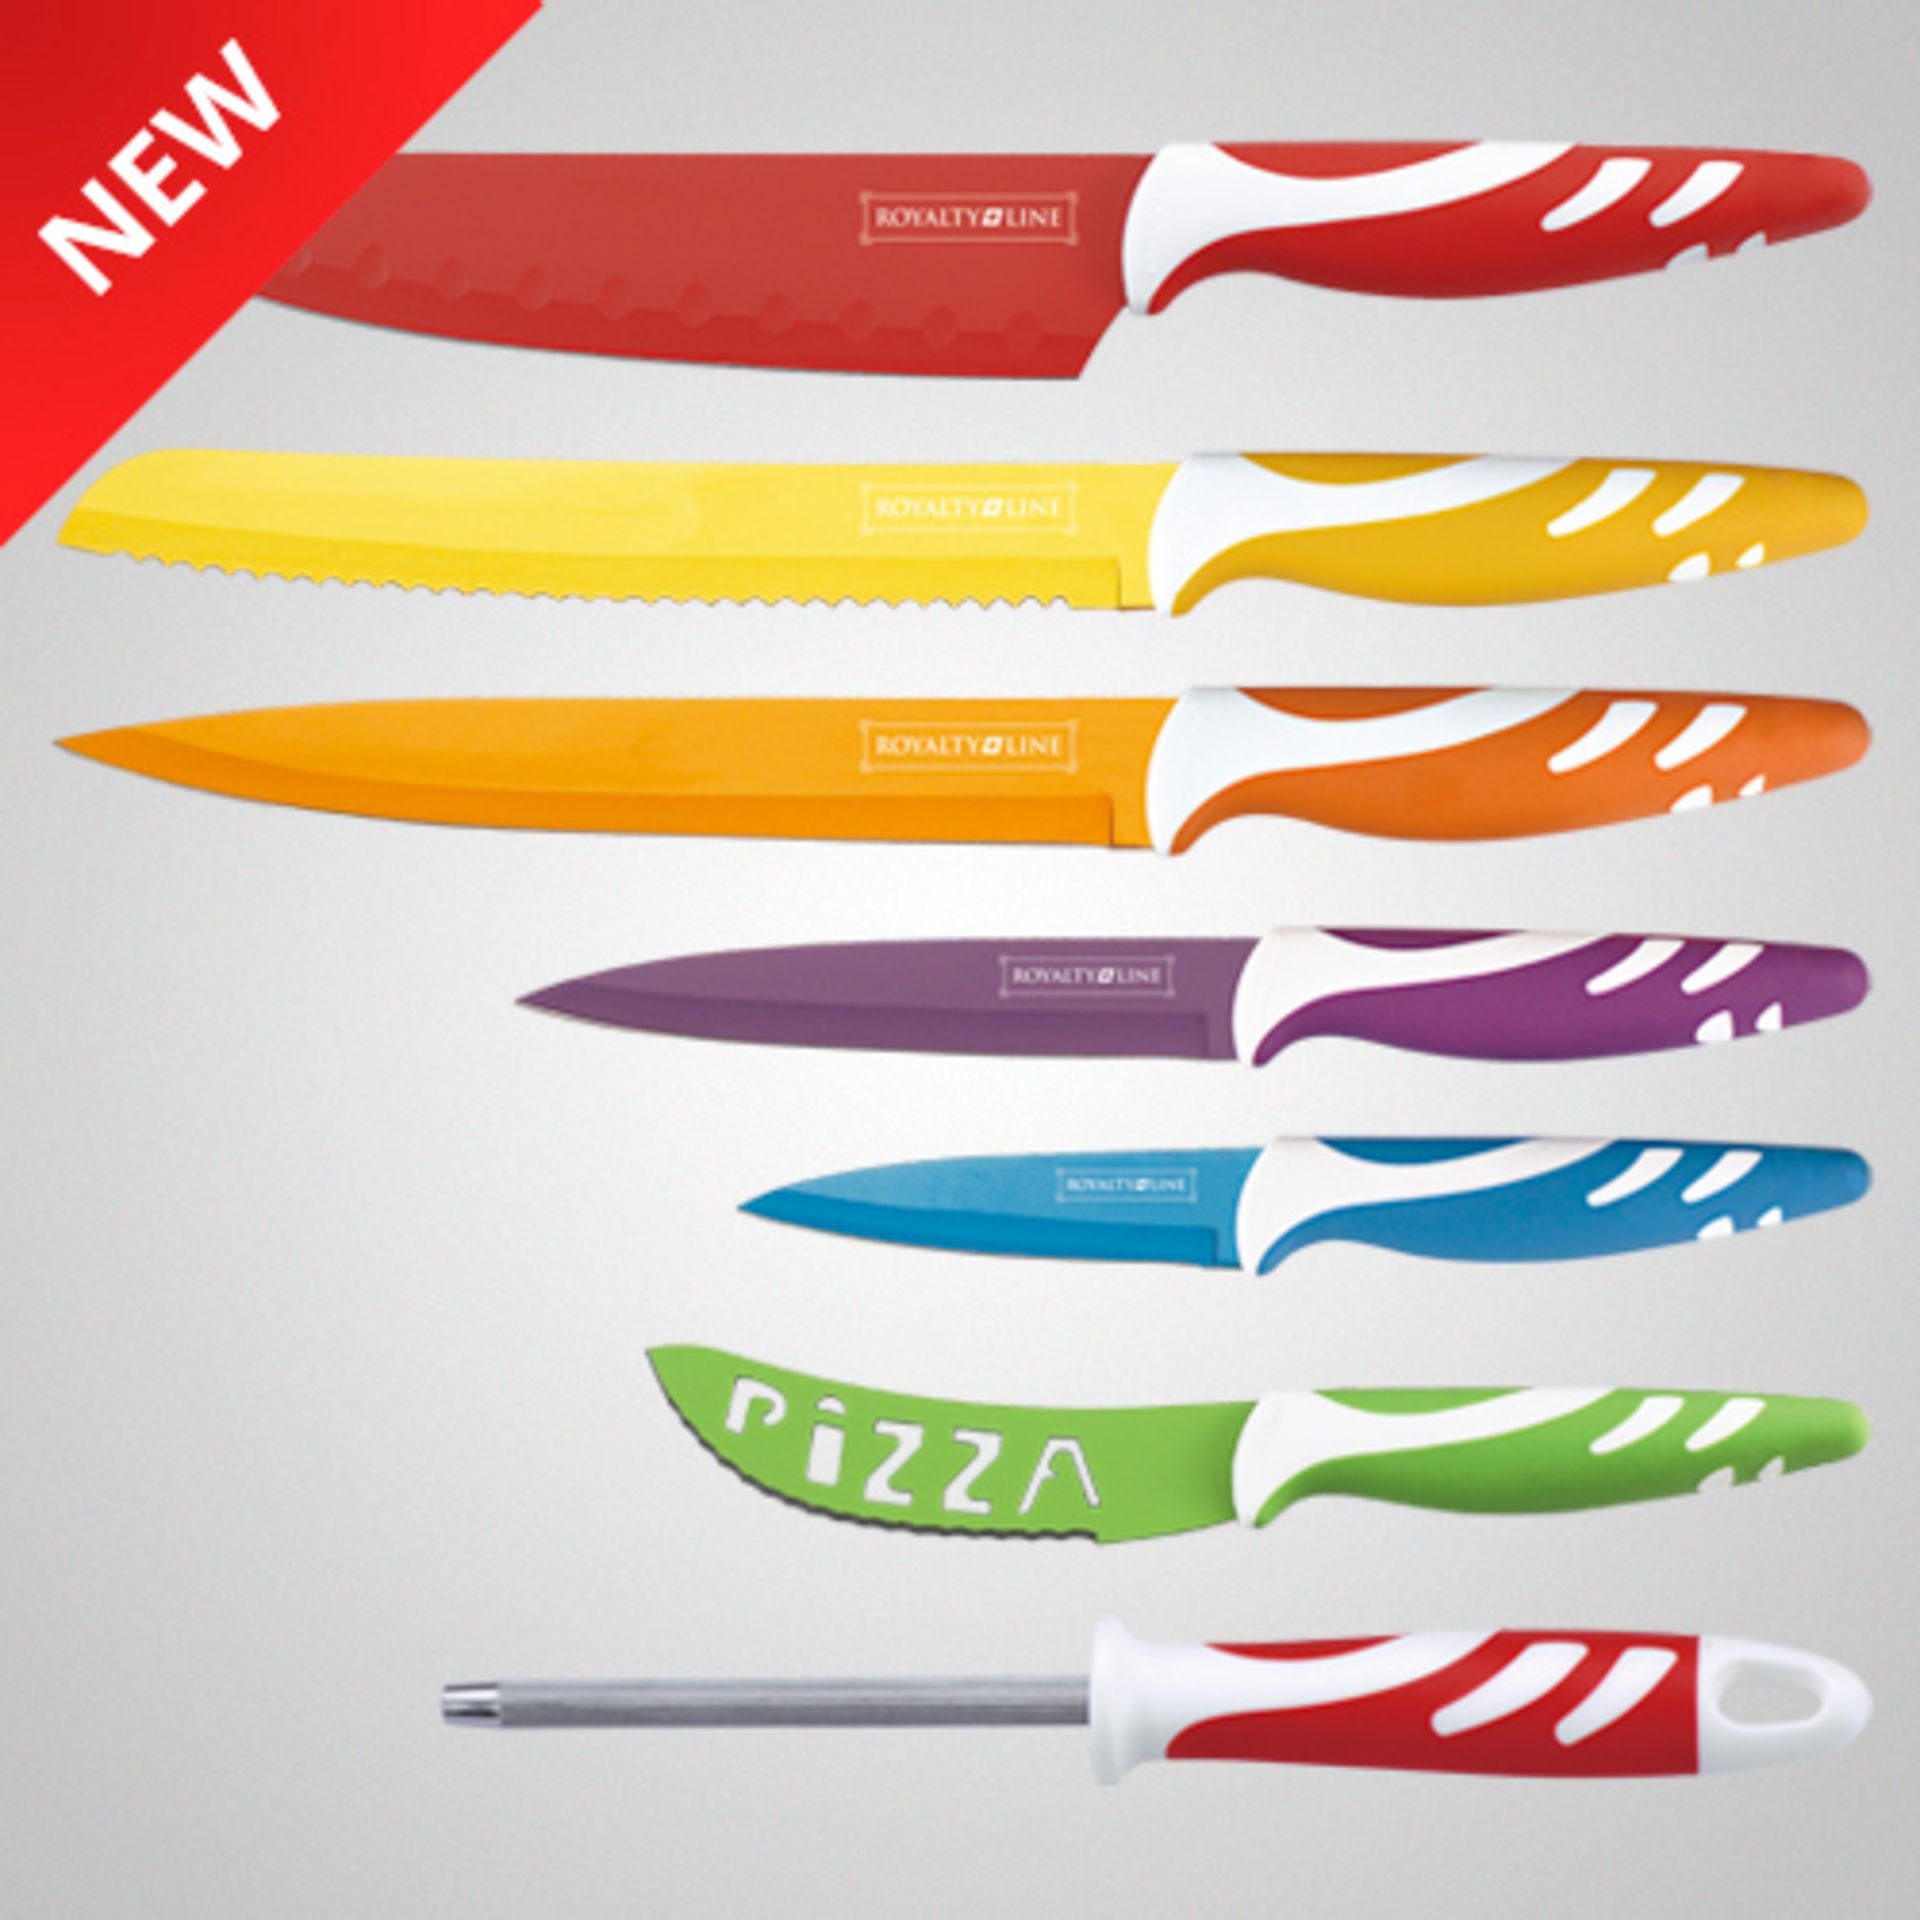 V Brand New 8 Piece Non-Stick Coated Coloured Knife Set RRP169.00 Euros X 2 YOUR BID PRICE TO BE